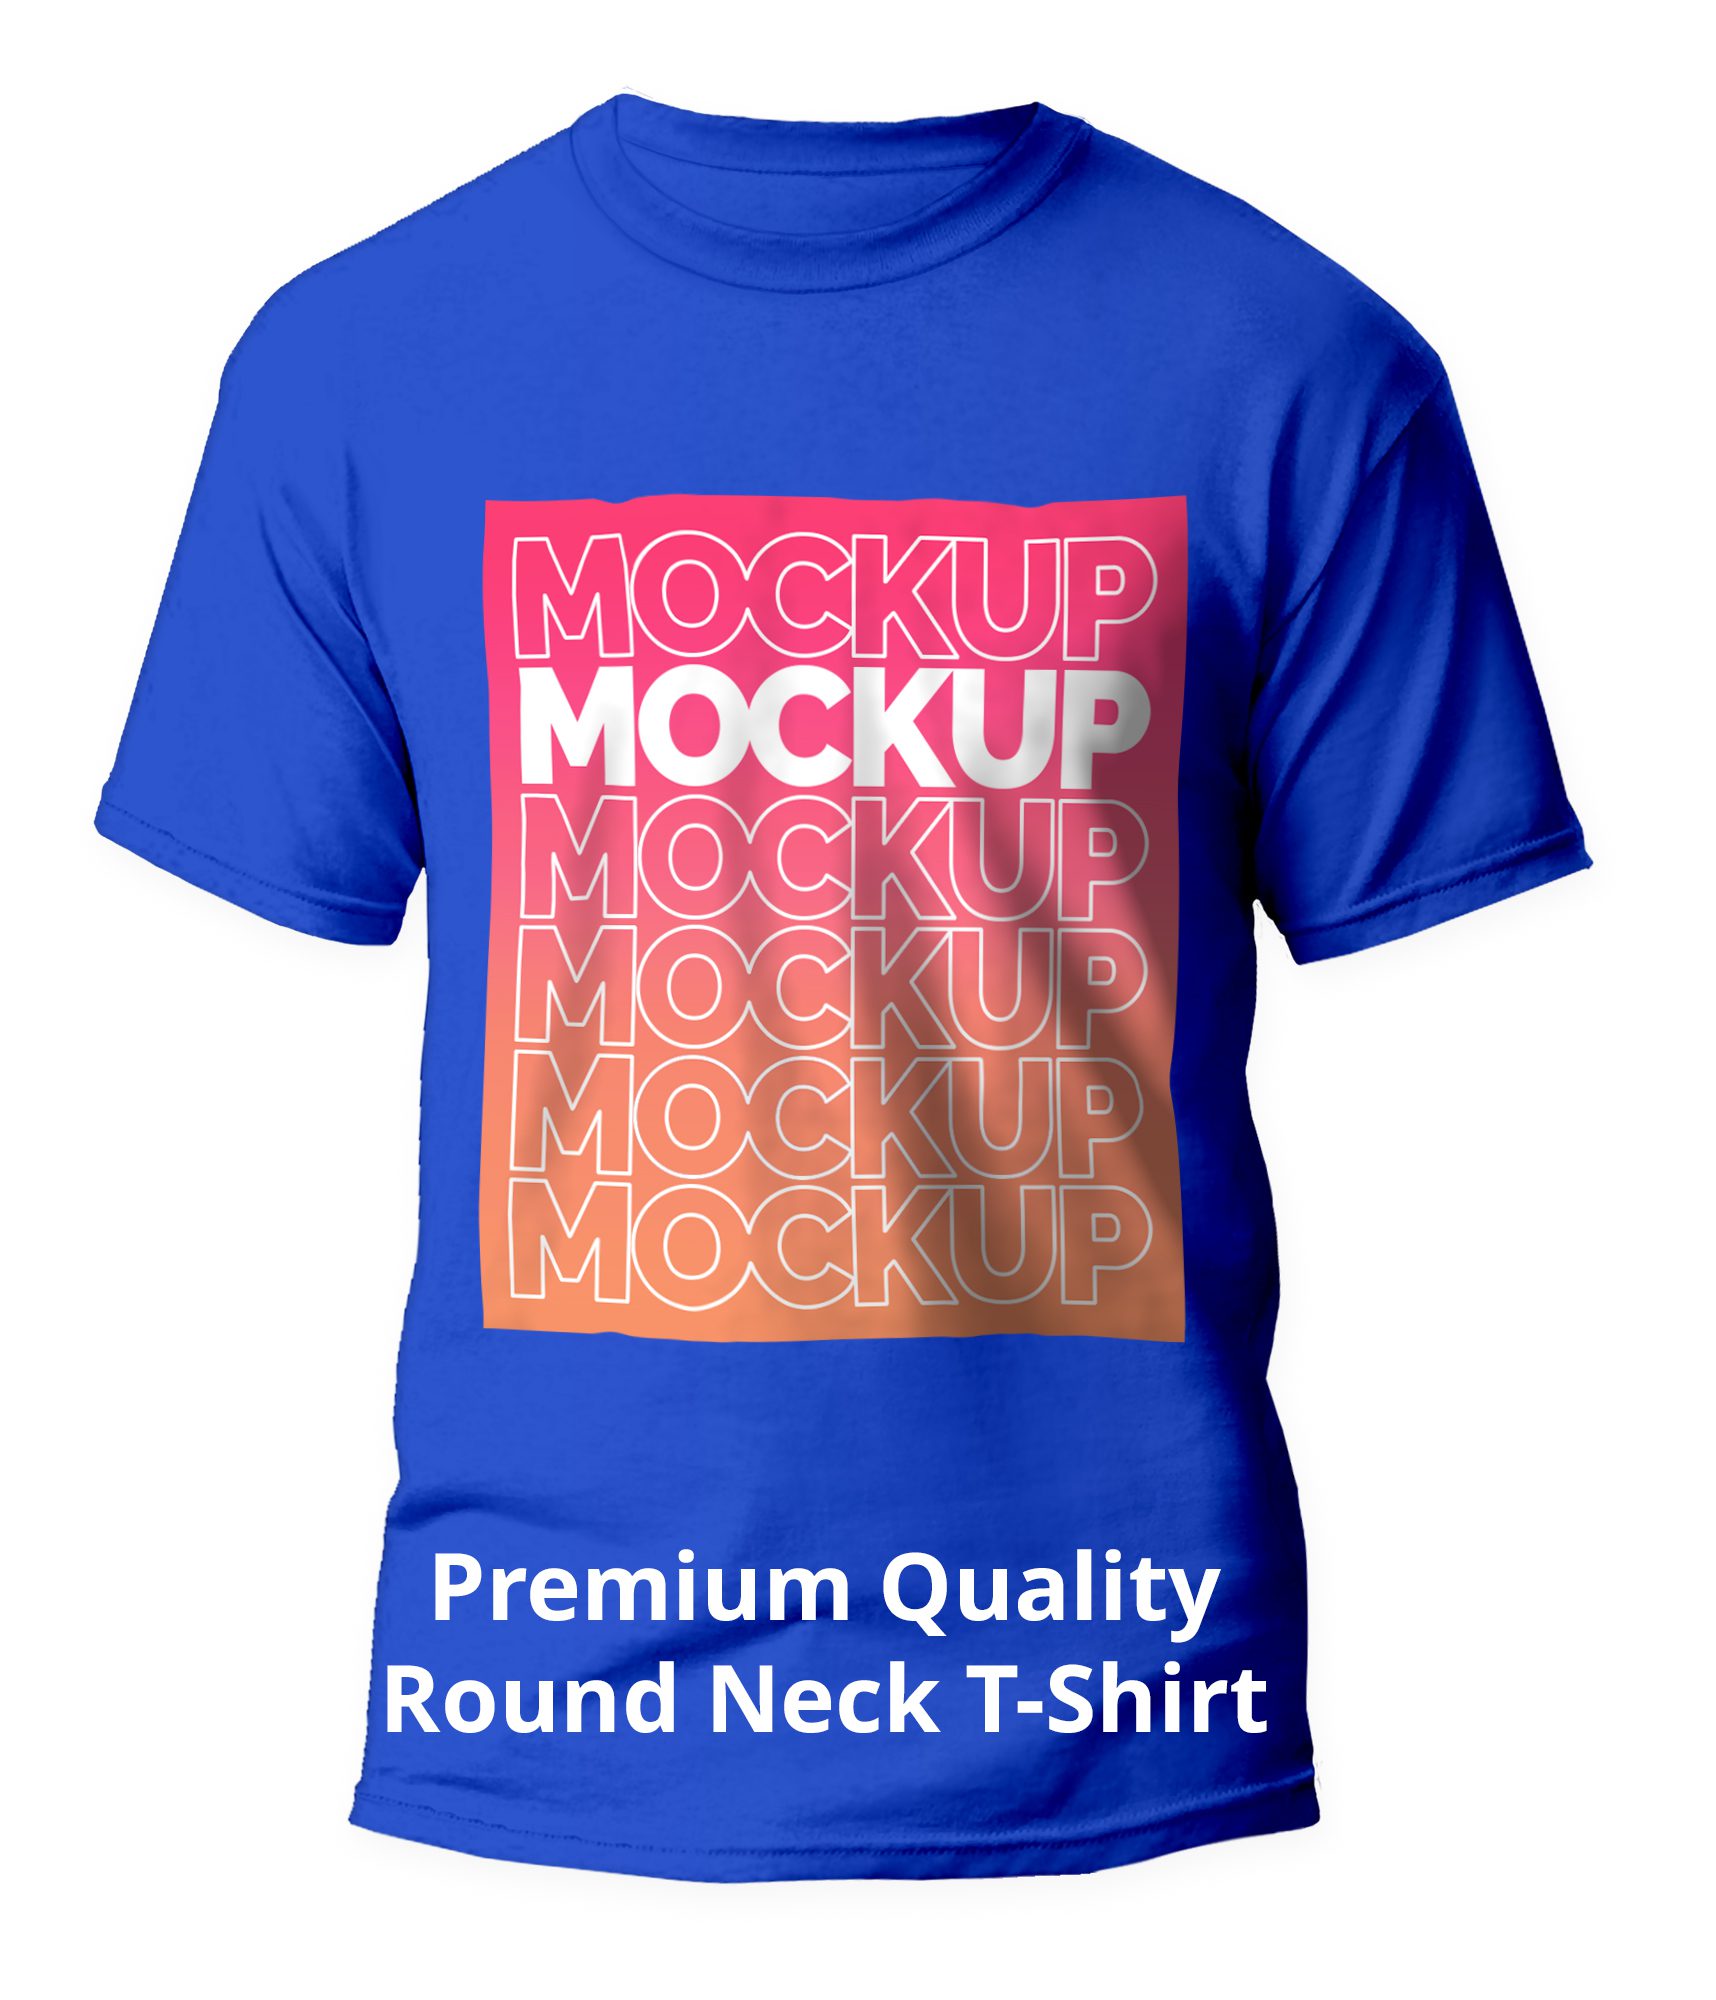 Round Neck T-Shirt with print - Corporate Giveaways